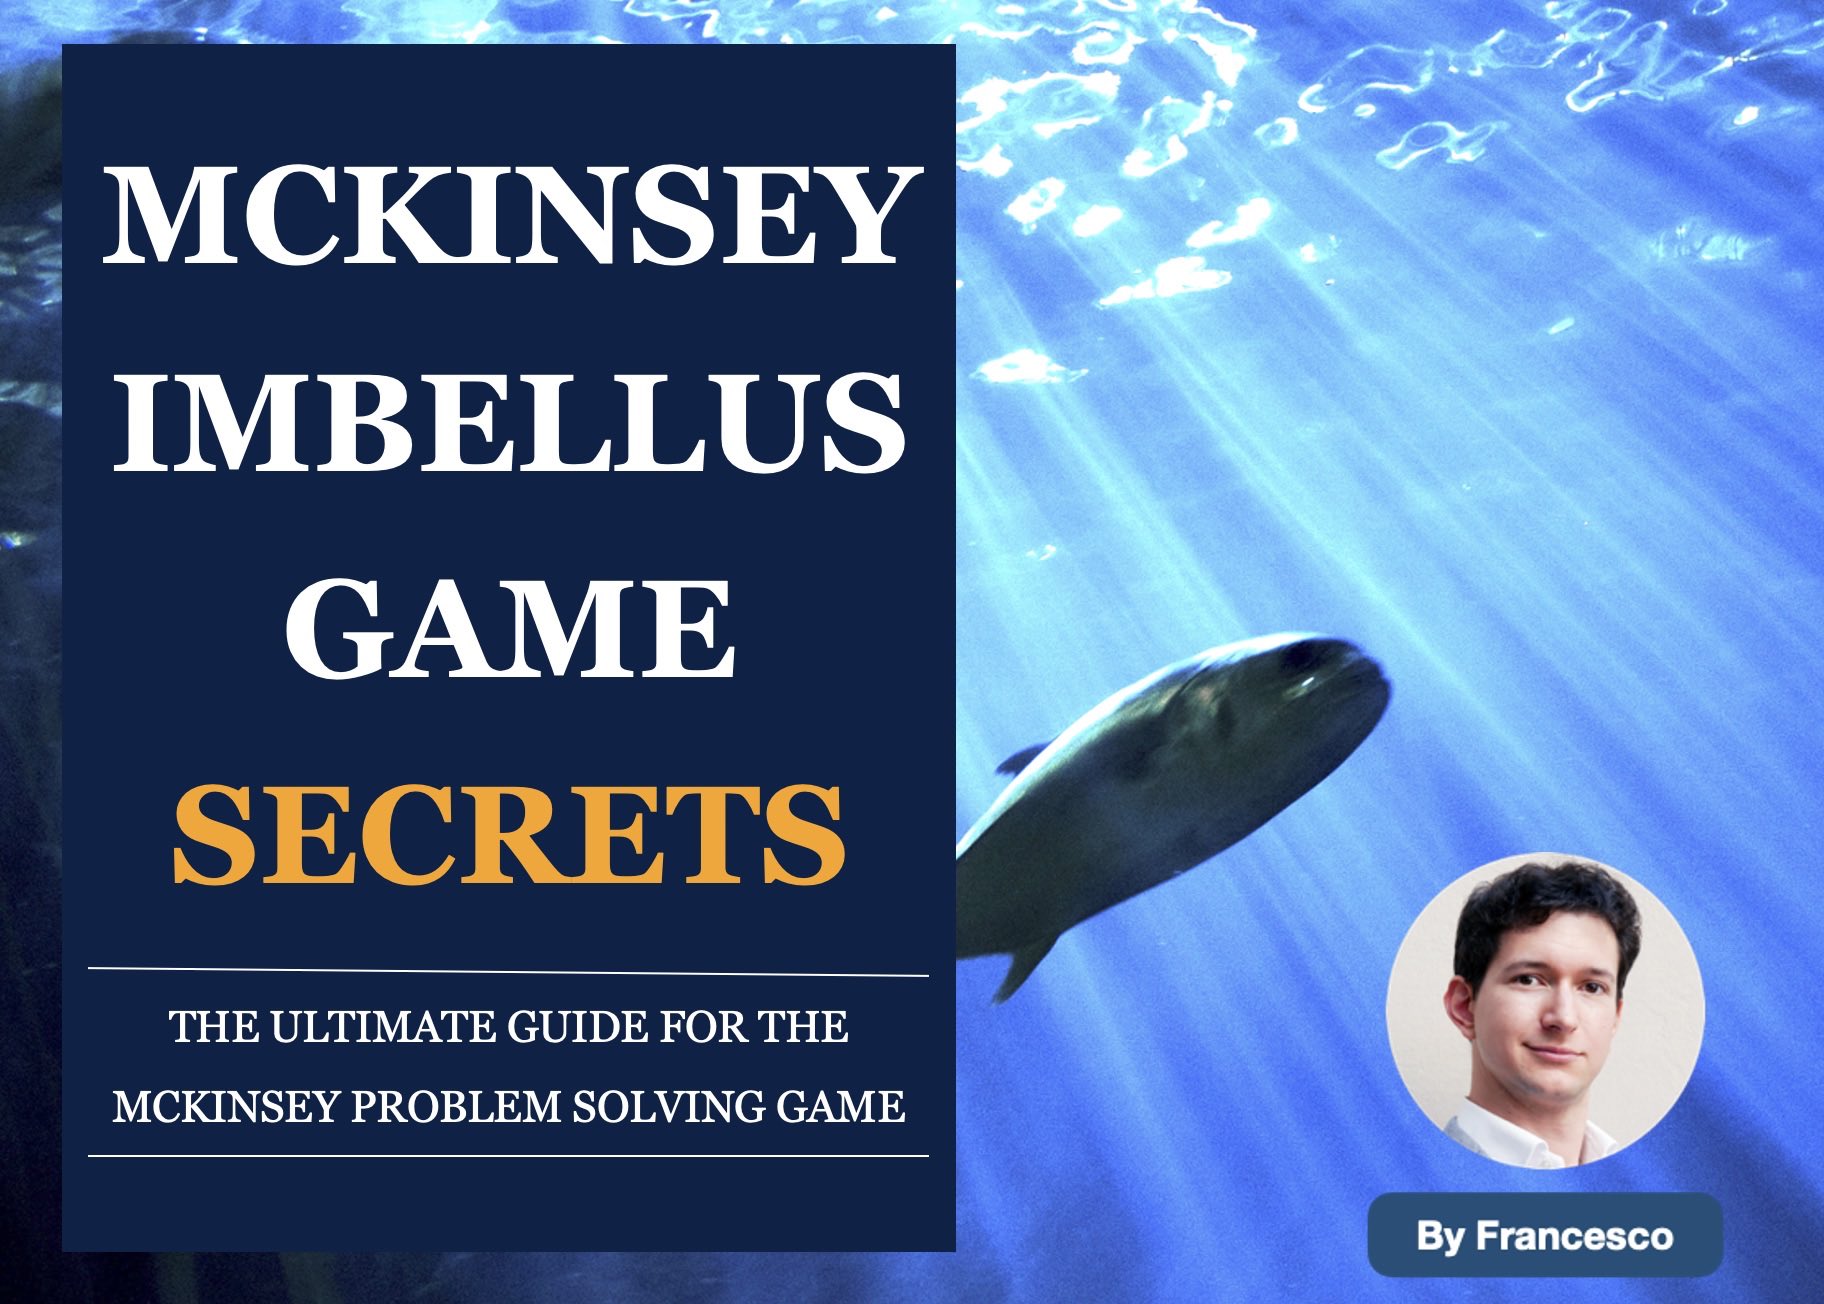 McKinsey Imbellus Test Guide by Francesco